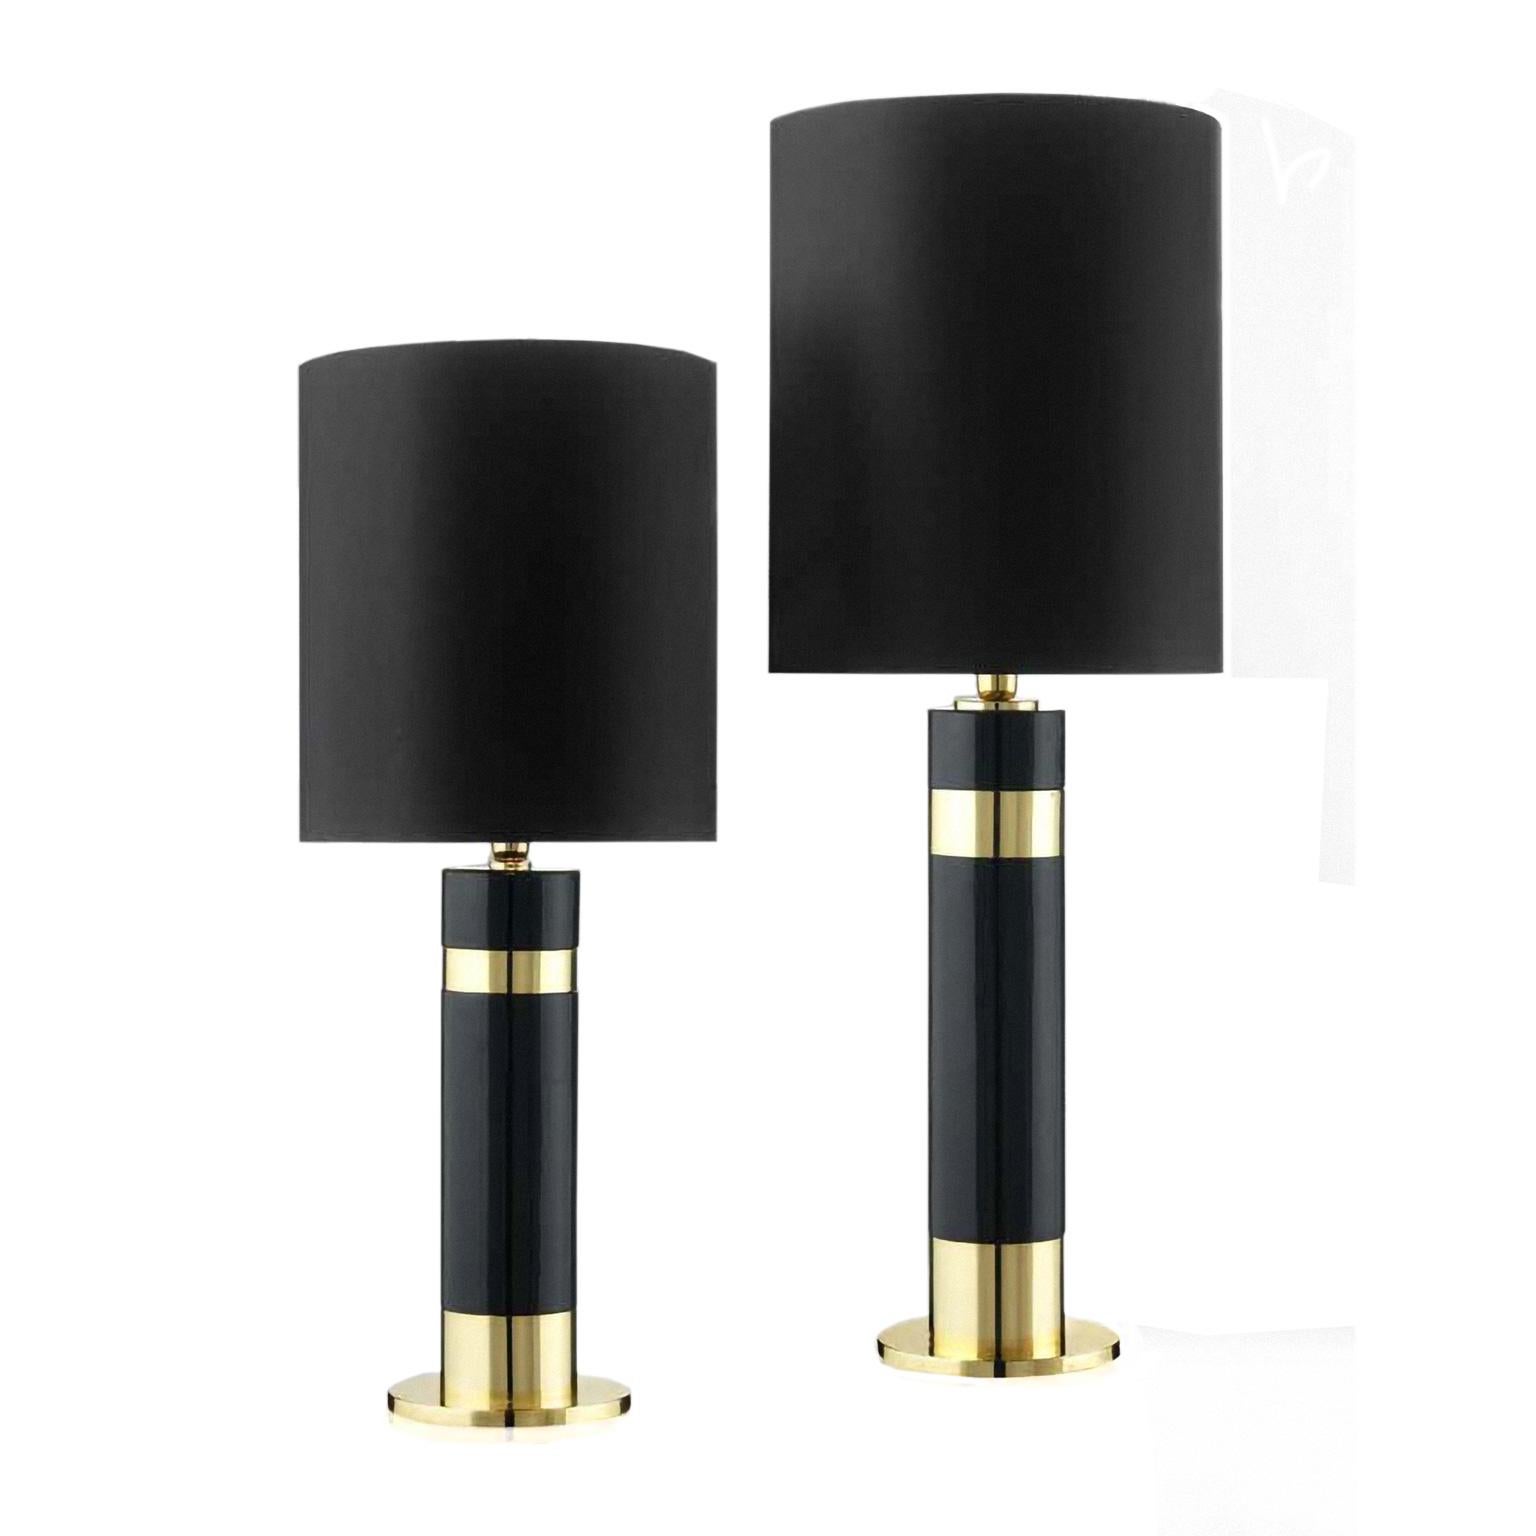 Hand-Crafted HERMES 2, Ceramic Lamp Black Glazed and Handcrafted in 24-Karat Gold For Sale